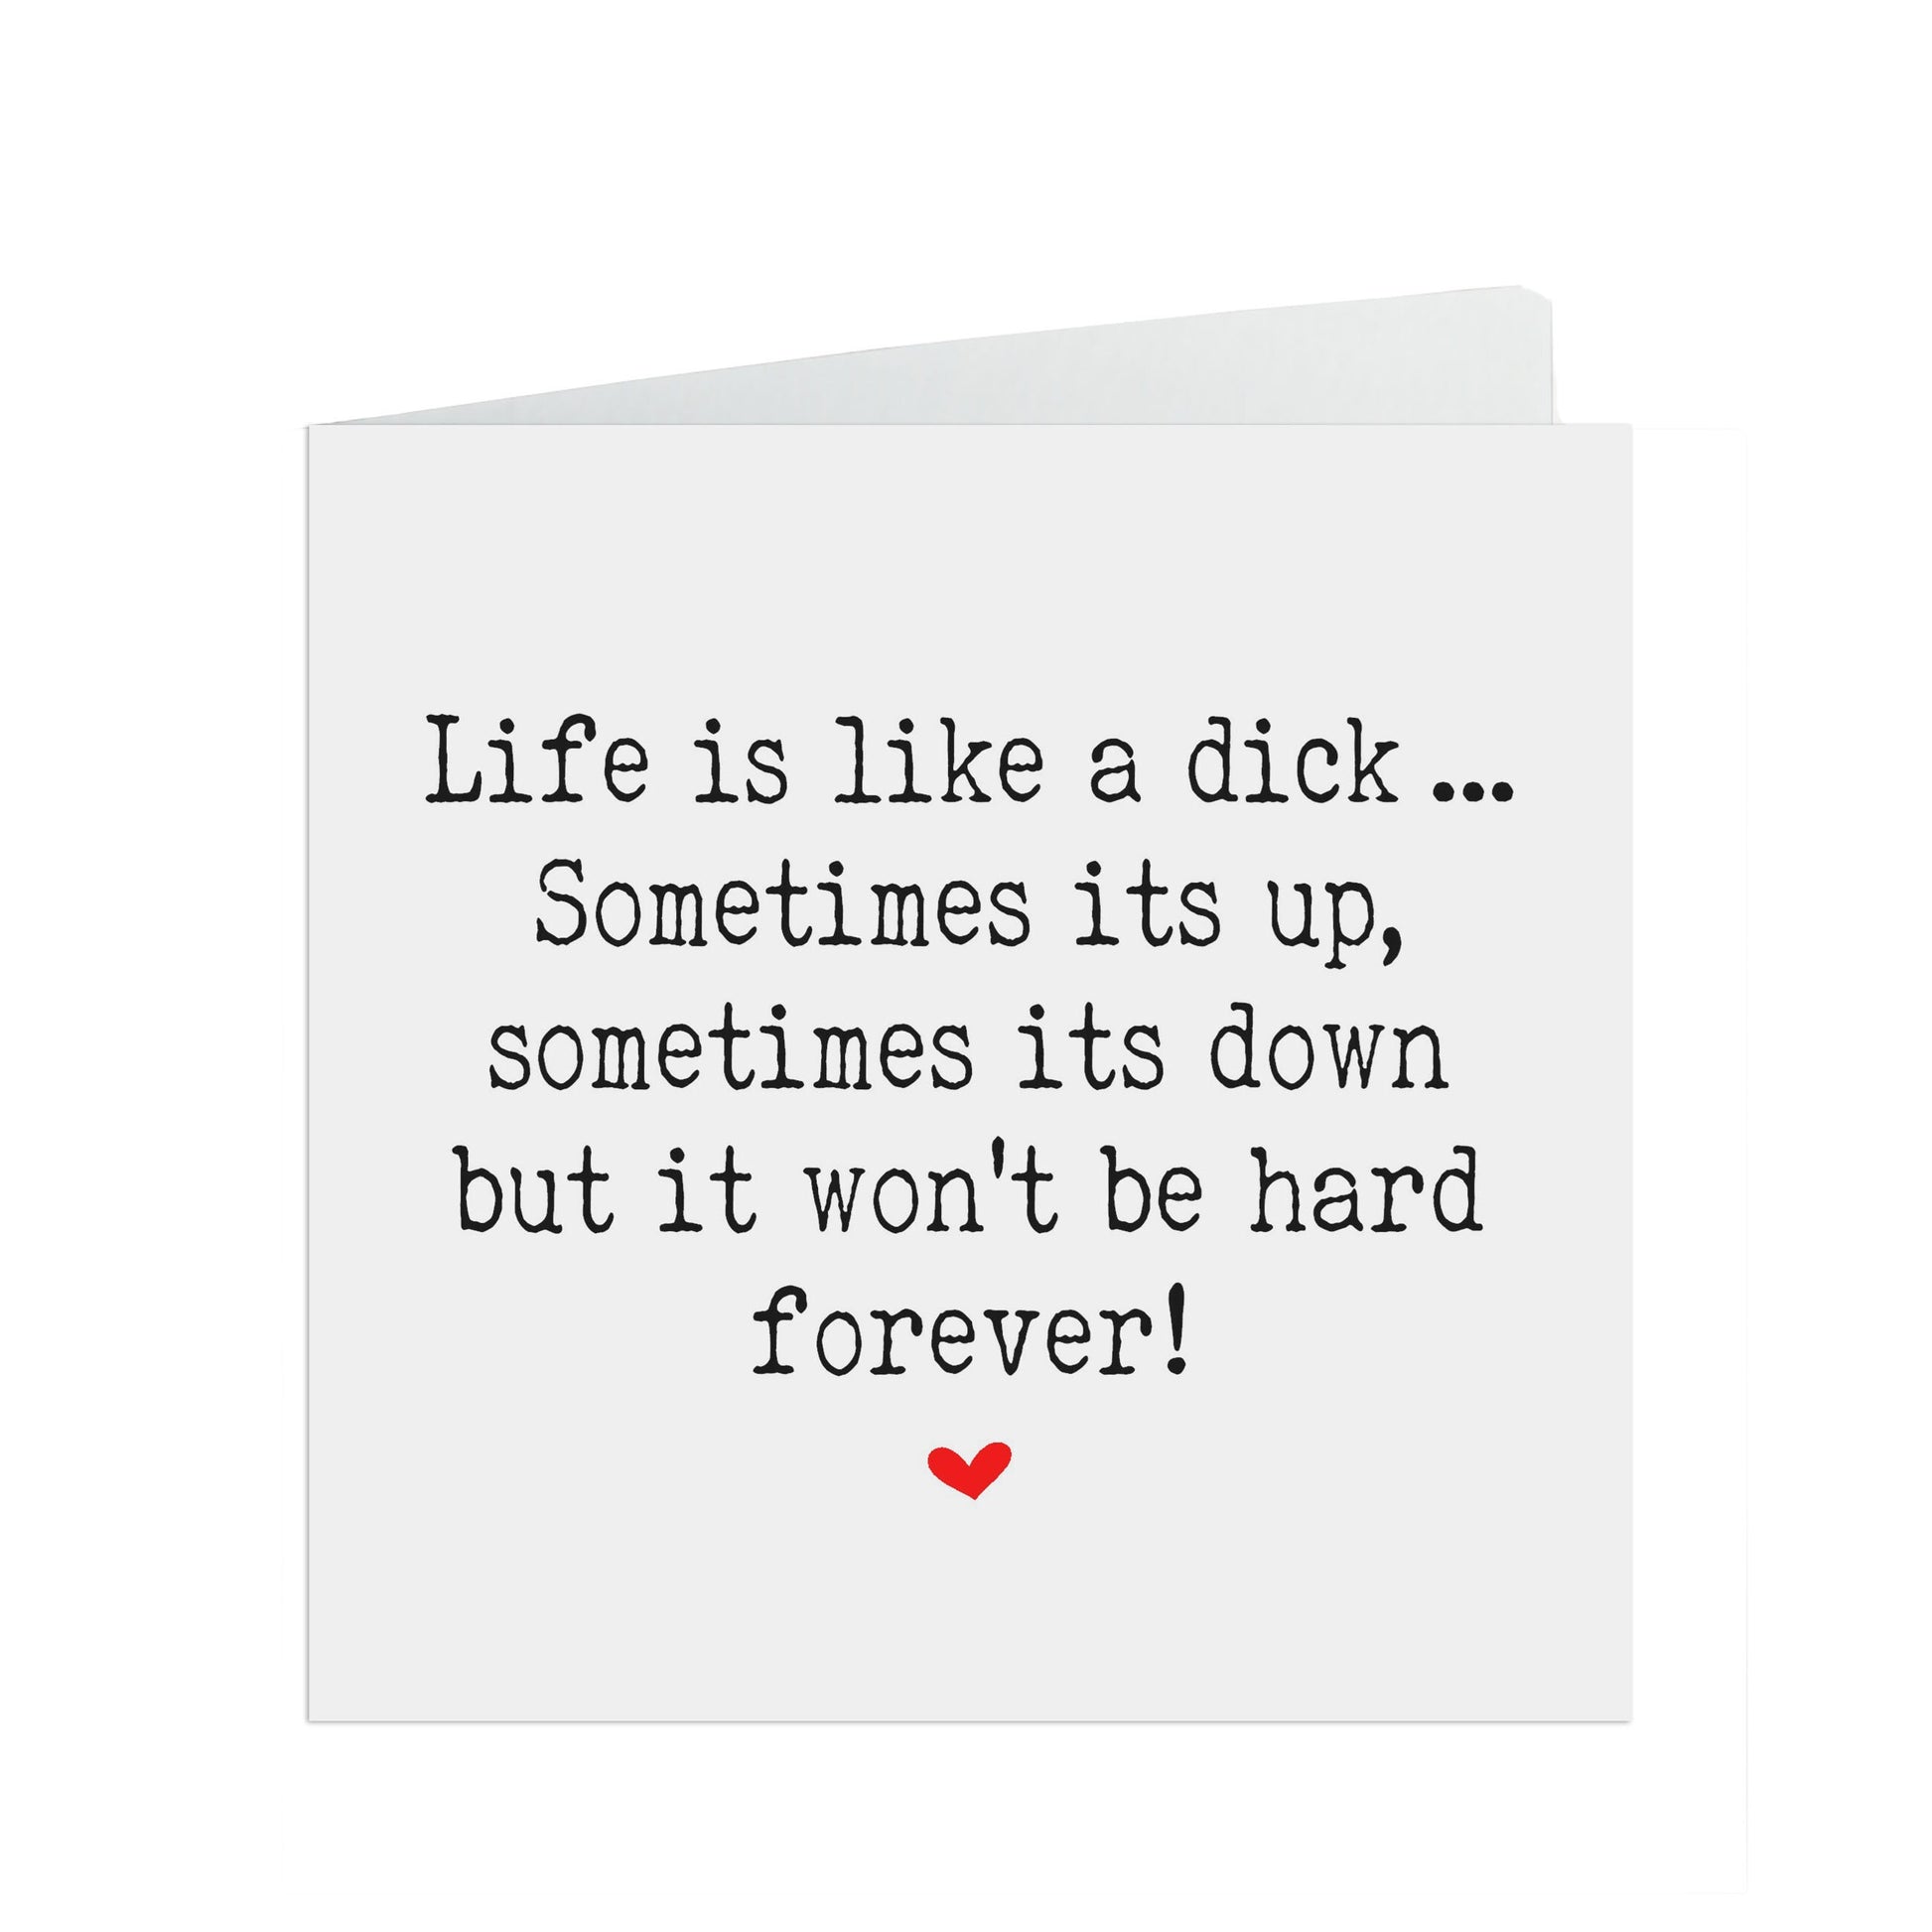 Life is like a d*ck, Motivation, encouragement or support card